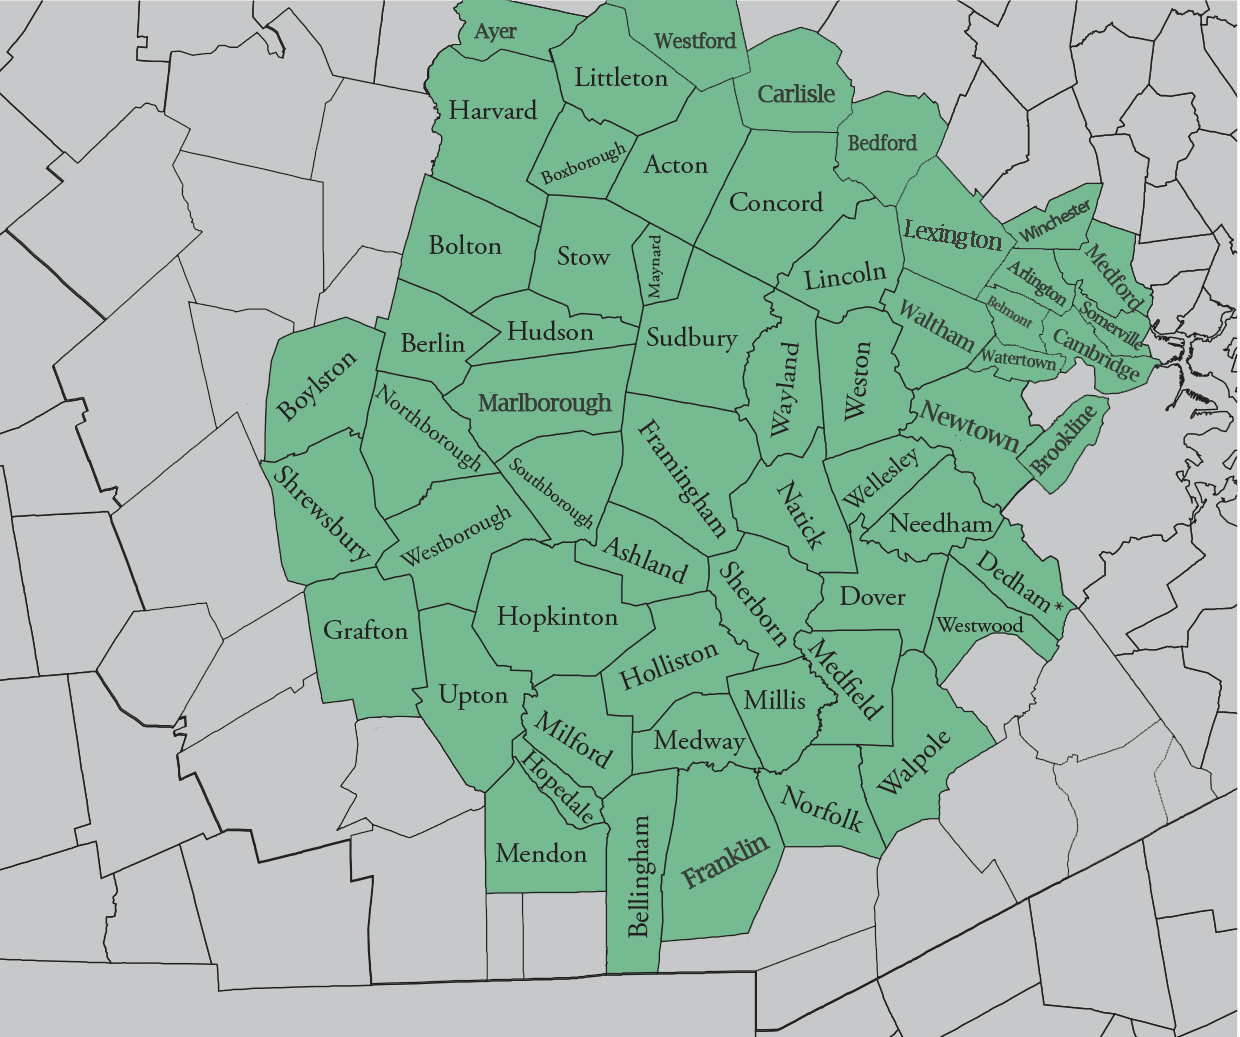 CPS covers many communities surrounding the Marlborough area